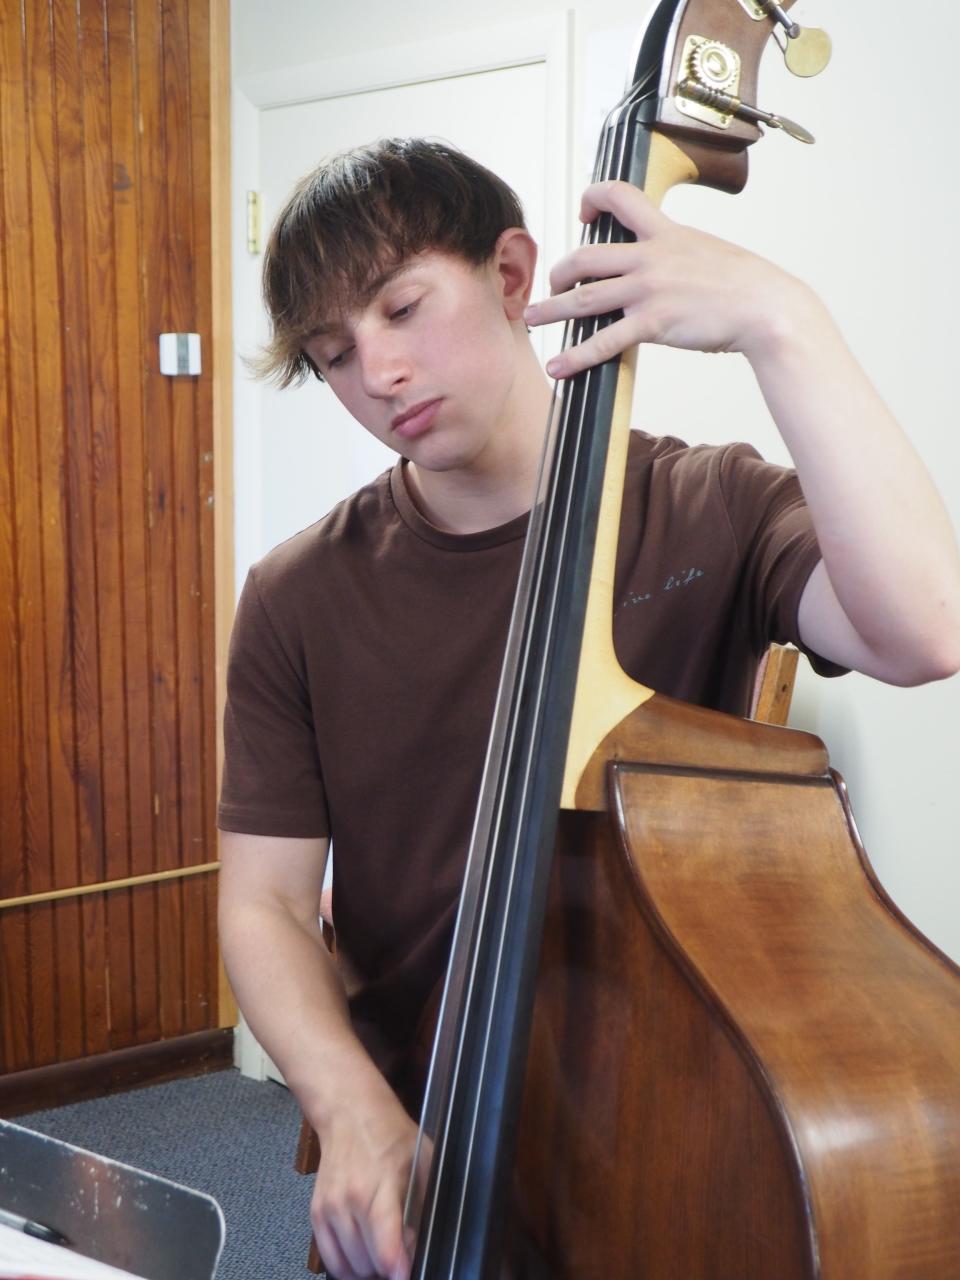 Logan Franklin of Knoxville, Tennessee plays upright bass at the Newport Jazz Summer Camp.